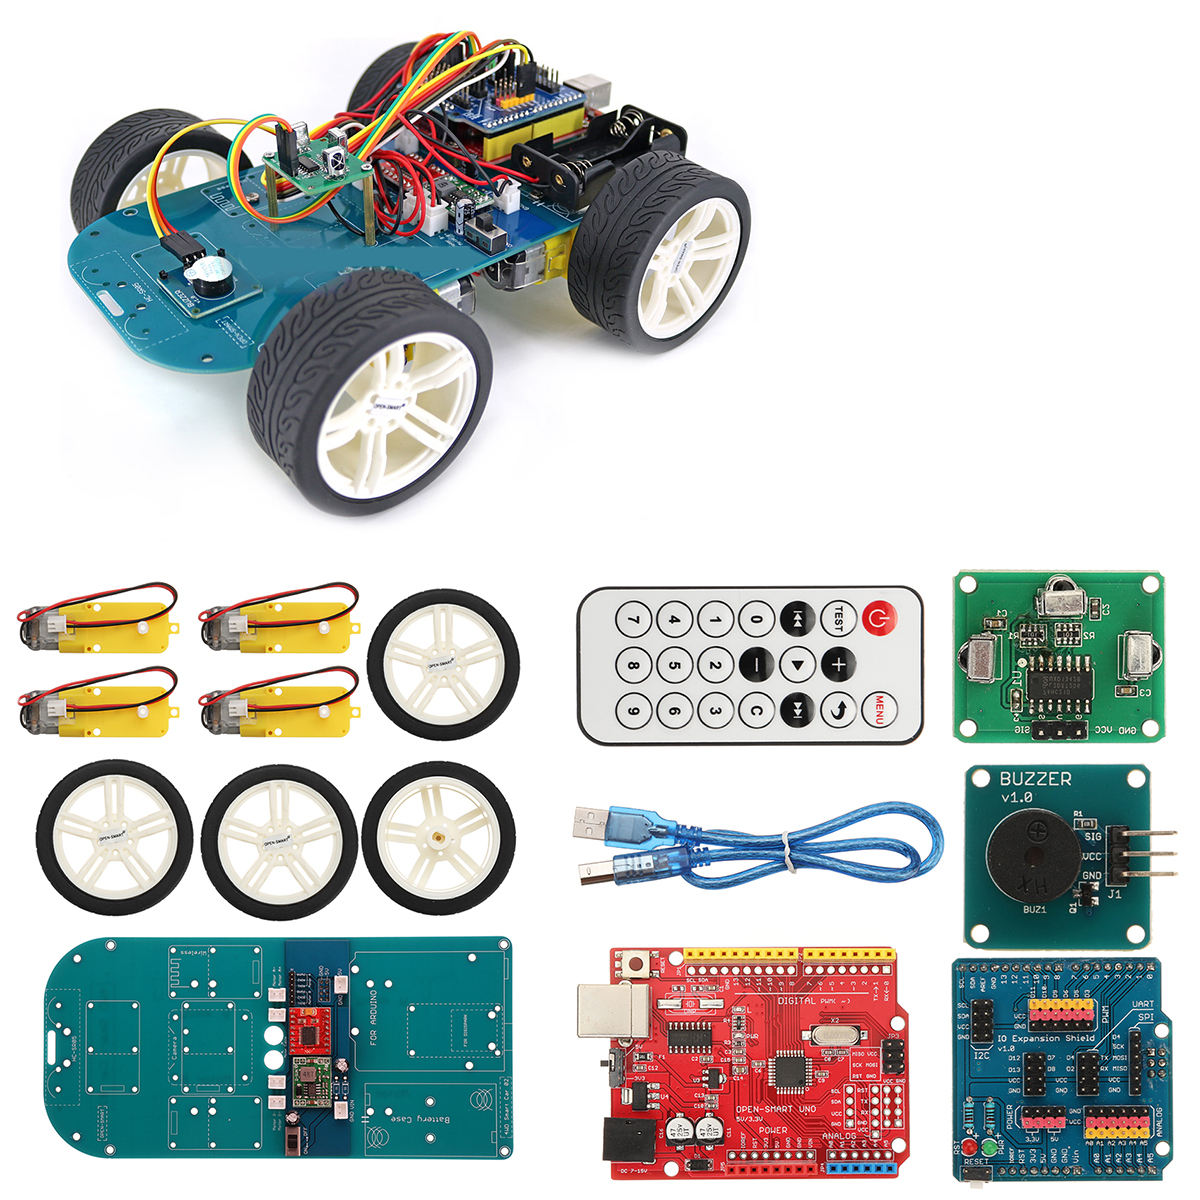 

4WD Wireless IR Remote Control Smart Car Arduino Kit for ATmega328P UNO R3 with IR Controller/UNO R3 Motherboard/TT Motor